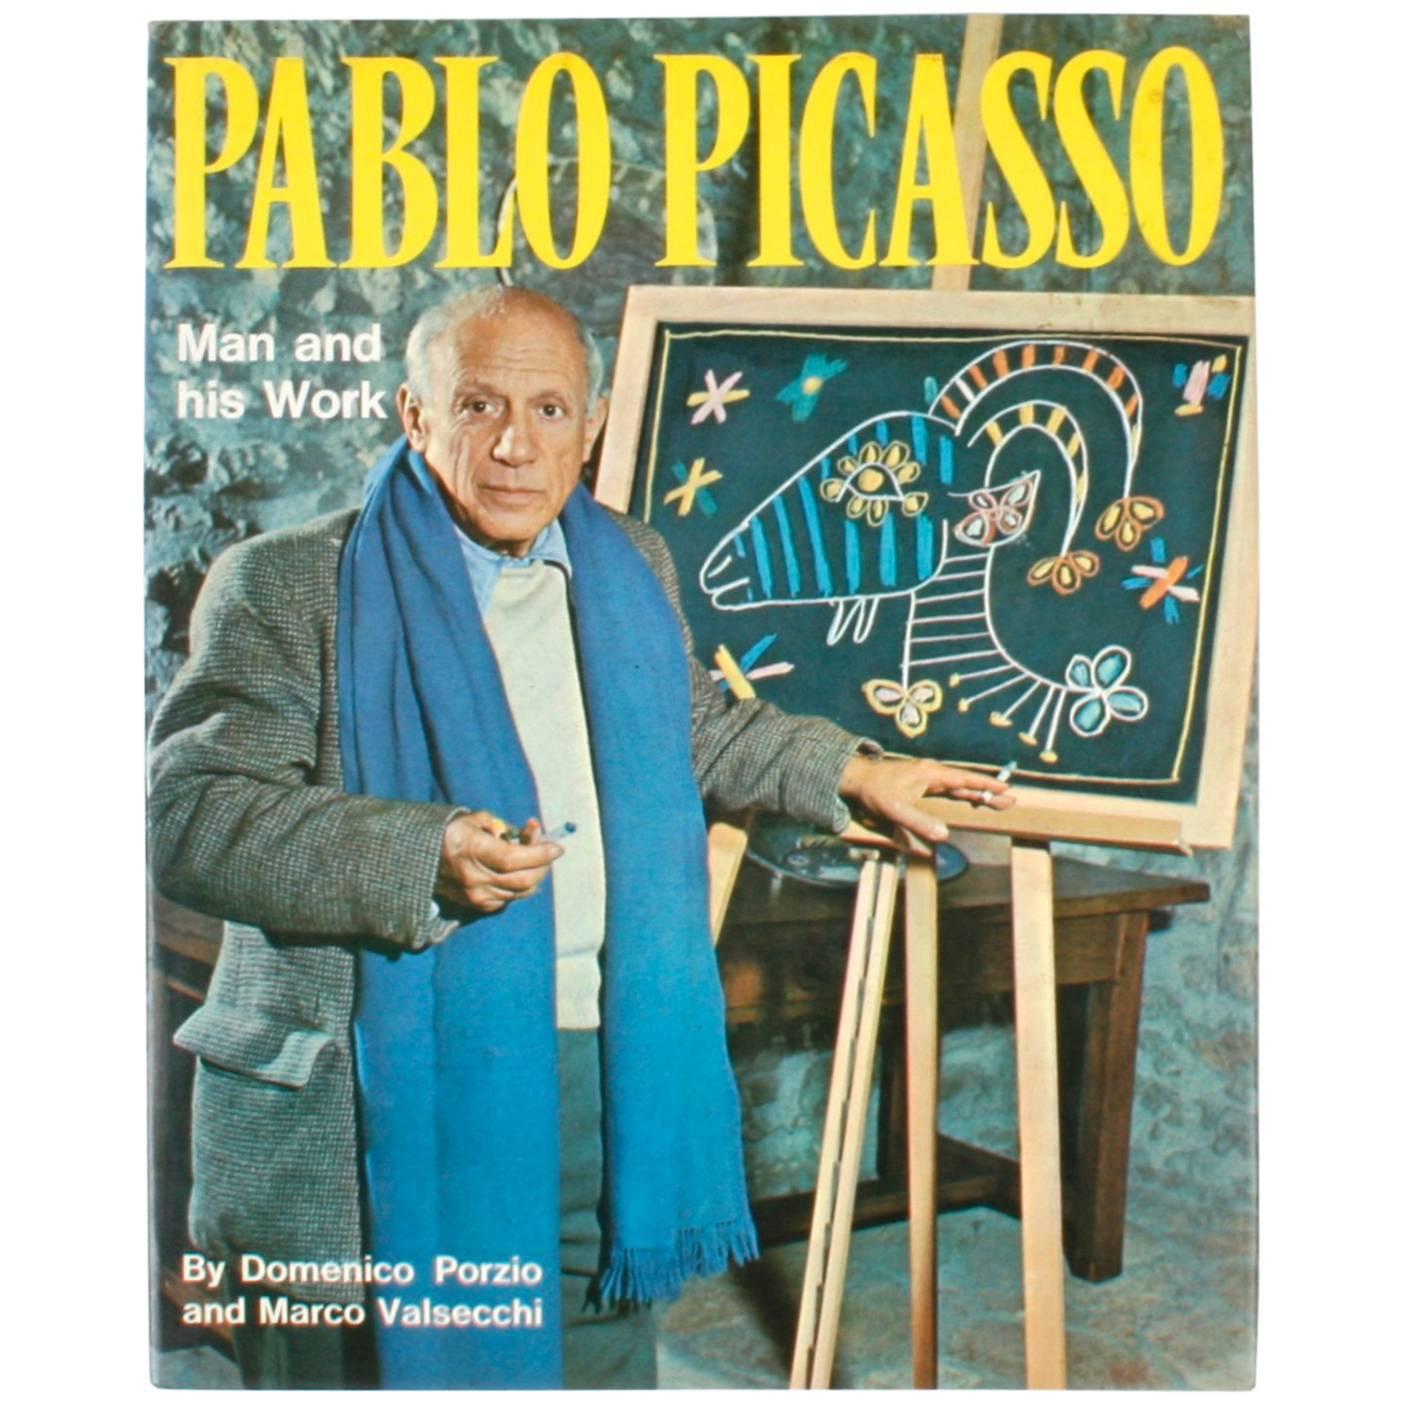 Pablo Picasso, Man and His Work, 1st English Edition